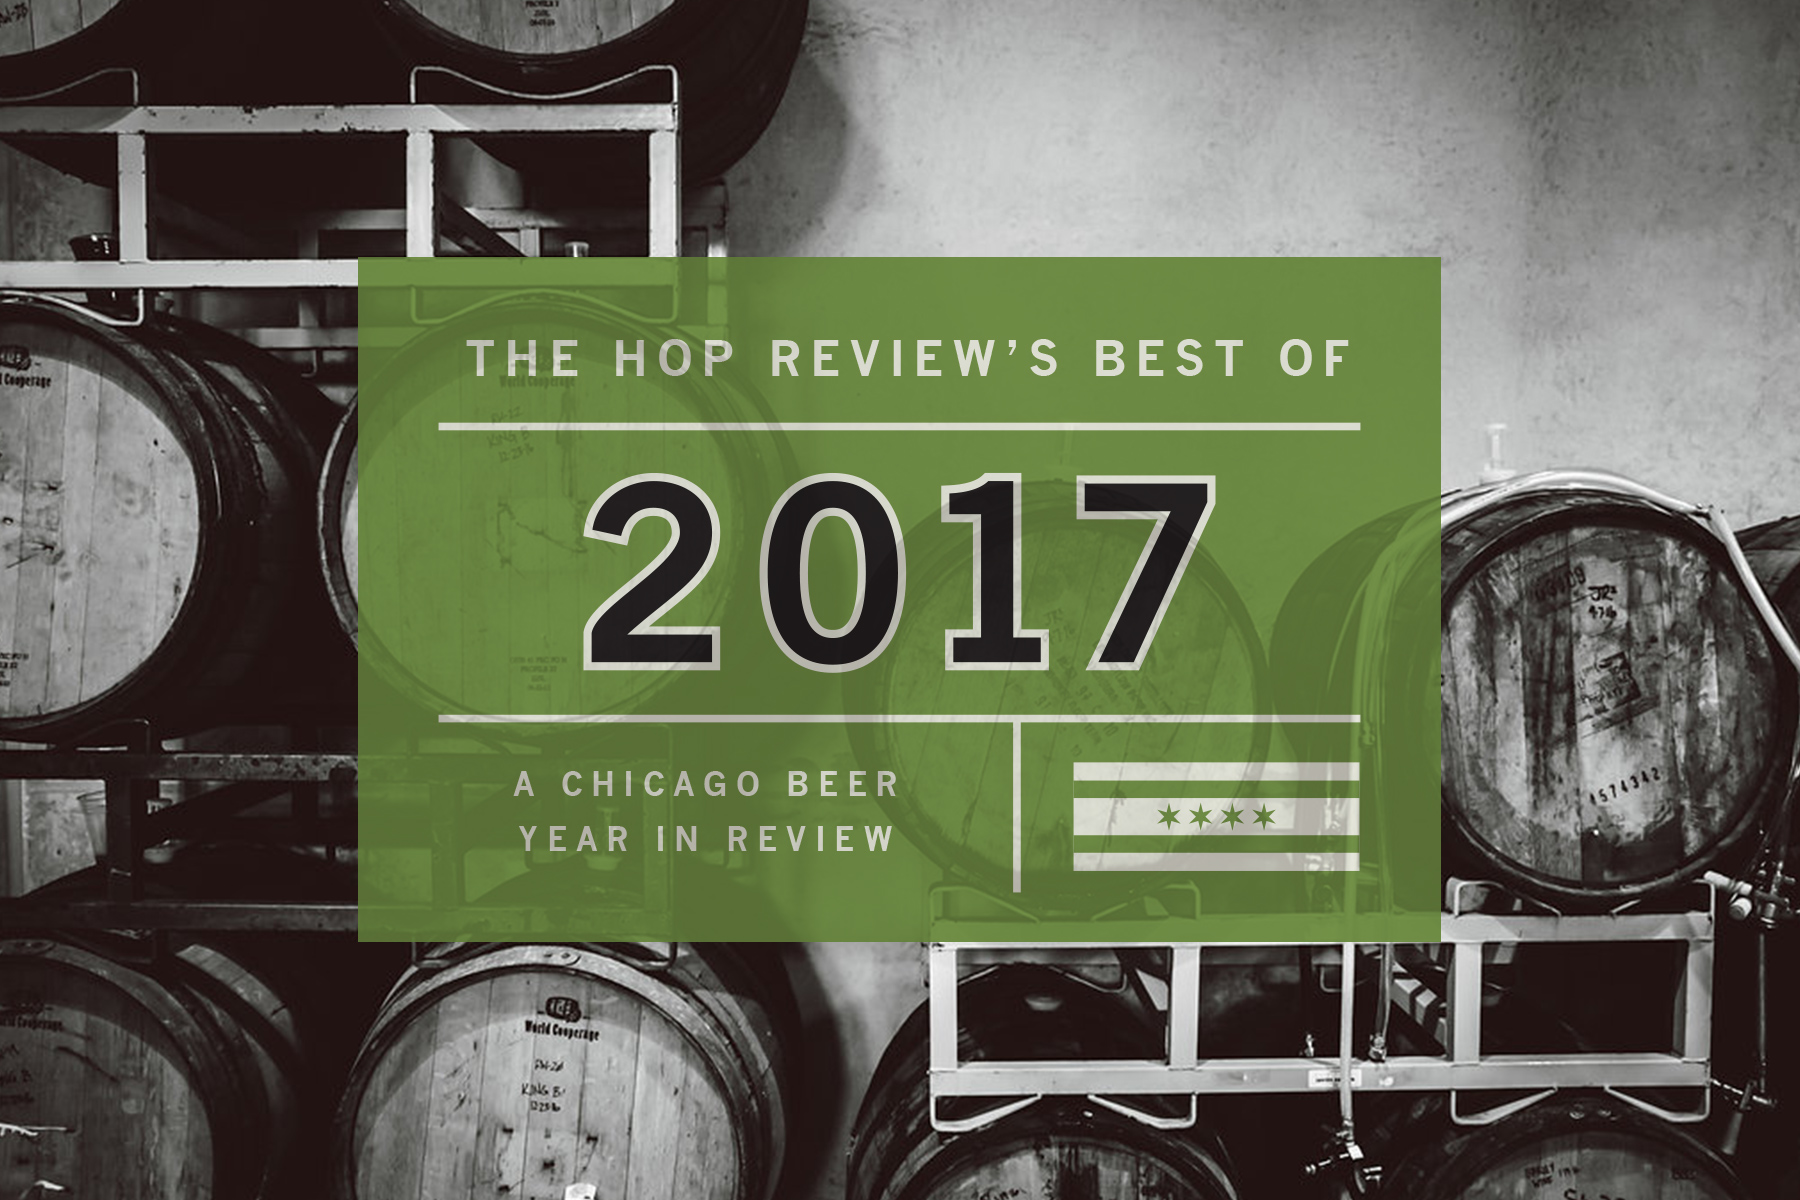 The Hop Review’s Best of Chicago 2017